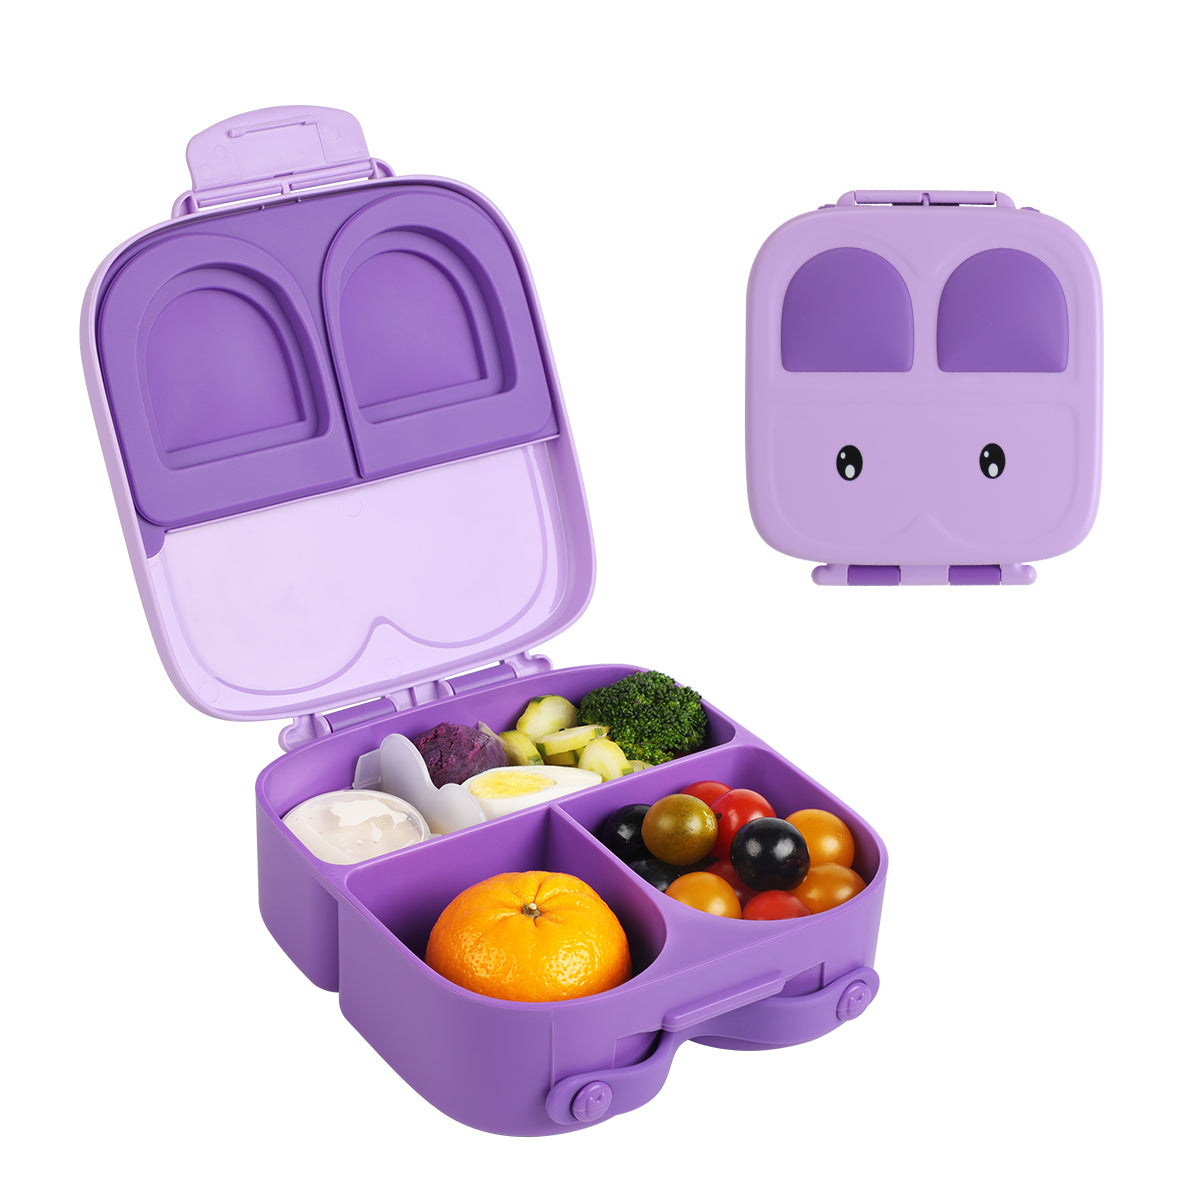 Snack Attack TM Lunch Box Bento style Bunny Shape Purple Color for Kids|3/4  Convertible Compartments| BPA FREE|LEAK PROOF| Dishwasher Safe | Back to